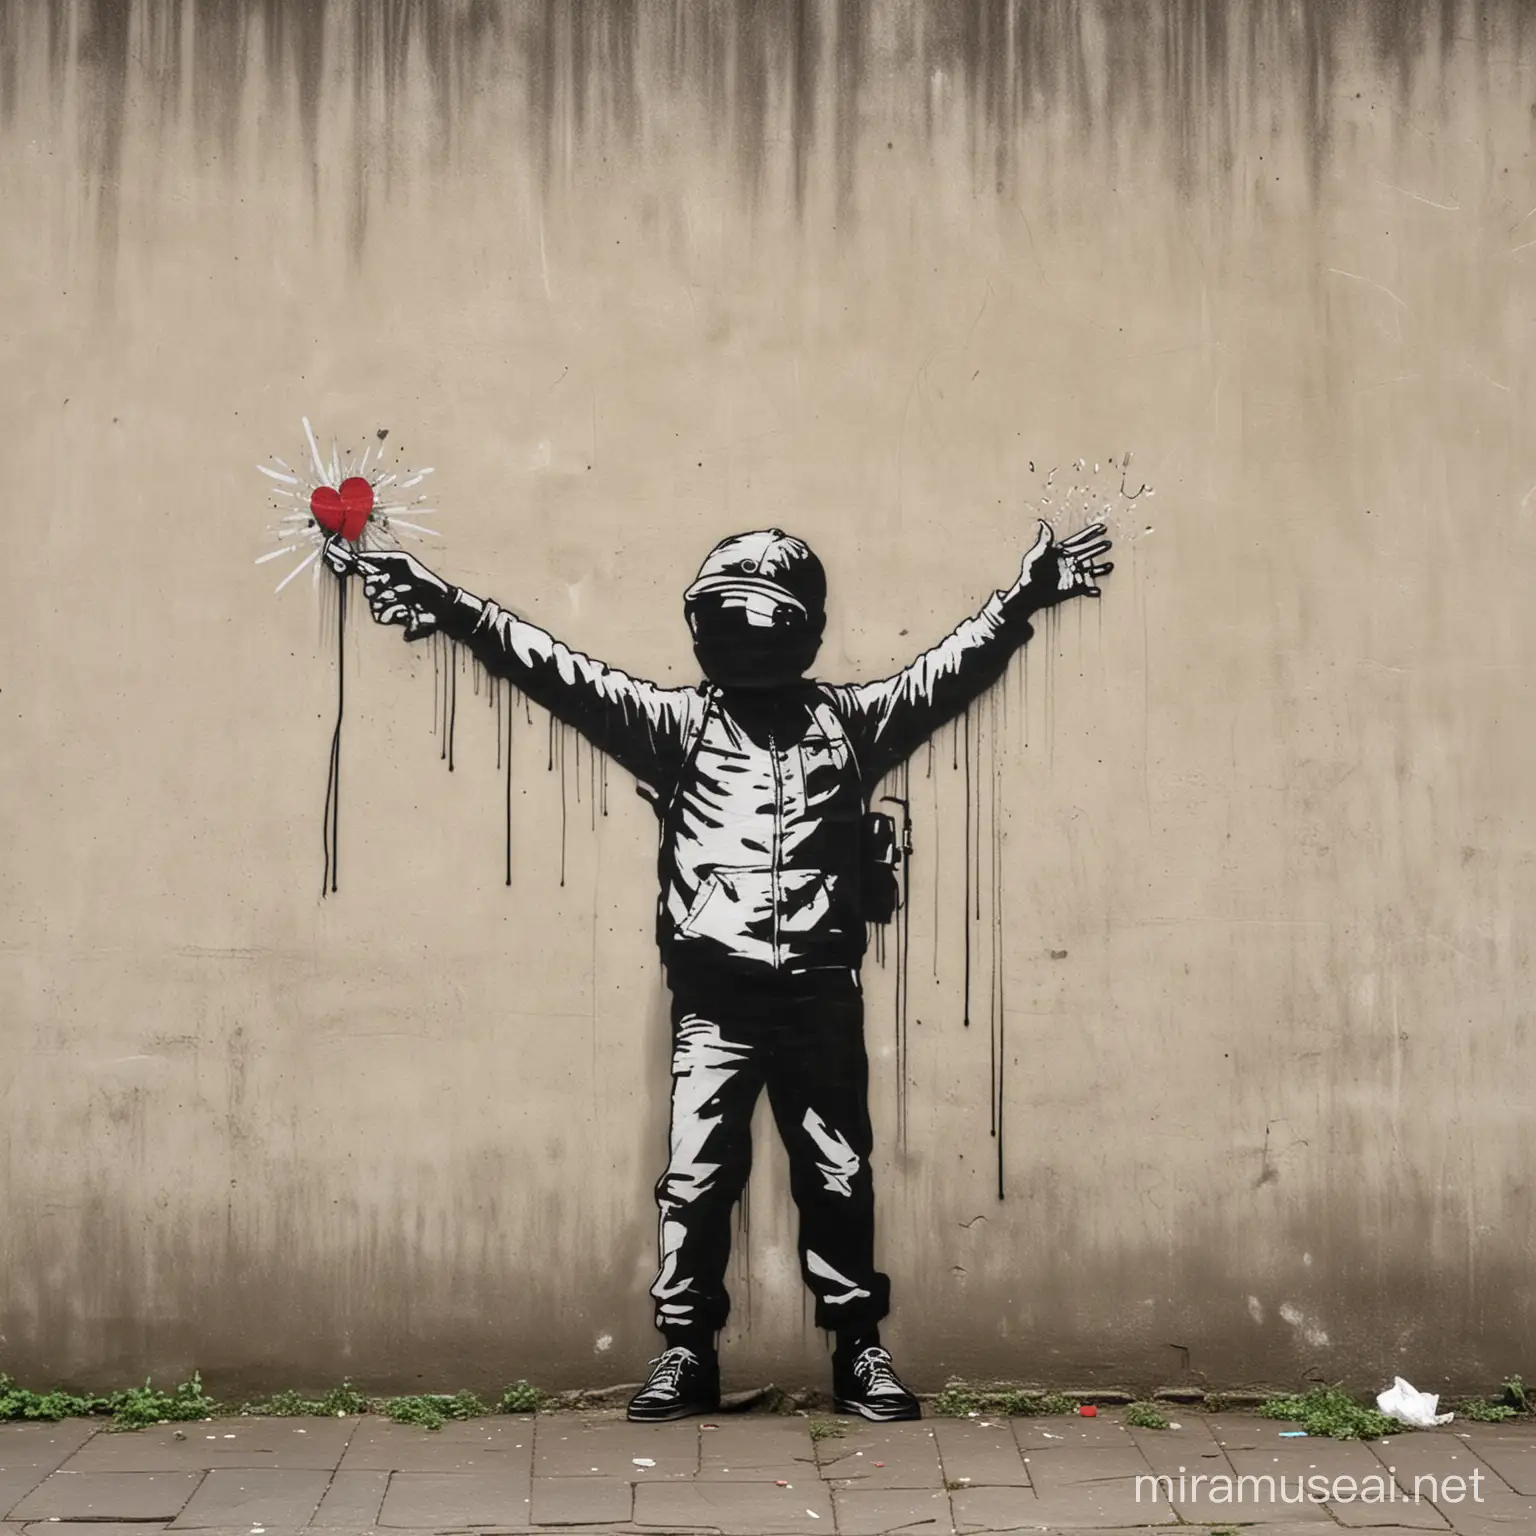 Make a graffiti on a wall in Banksy style that raises awareness of wats in the world